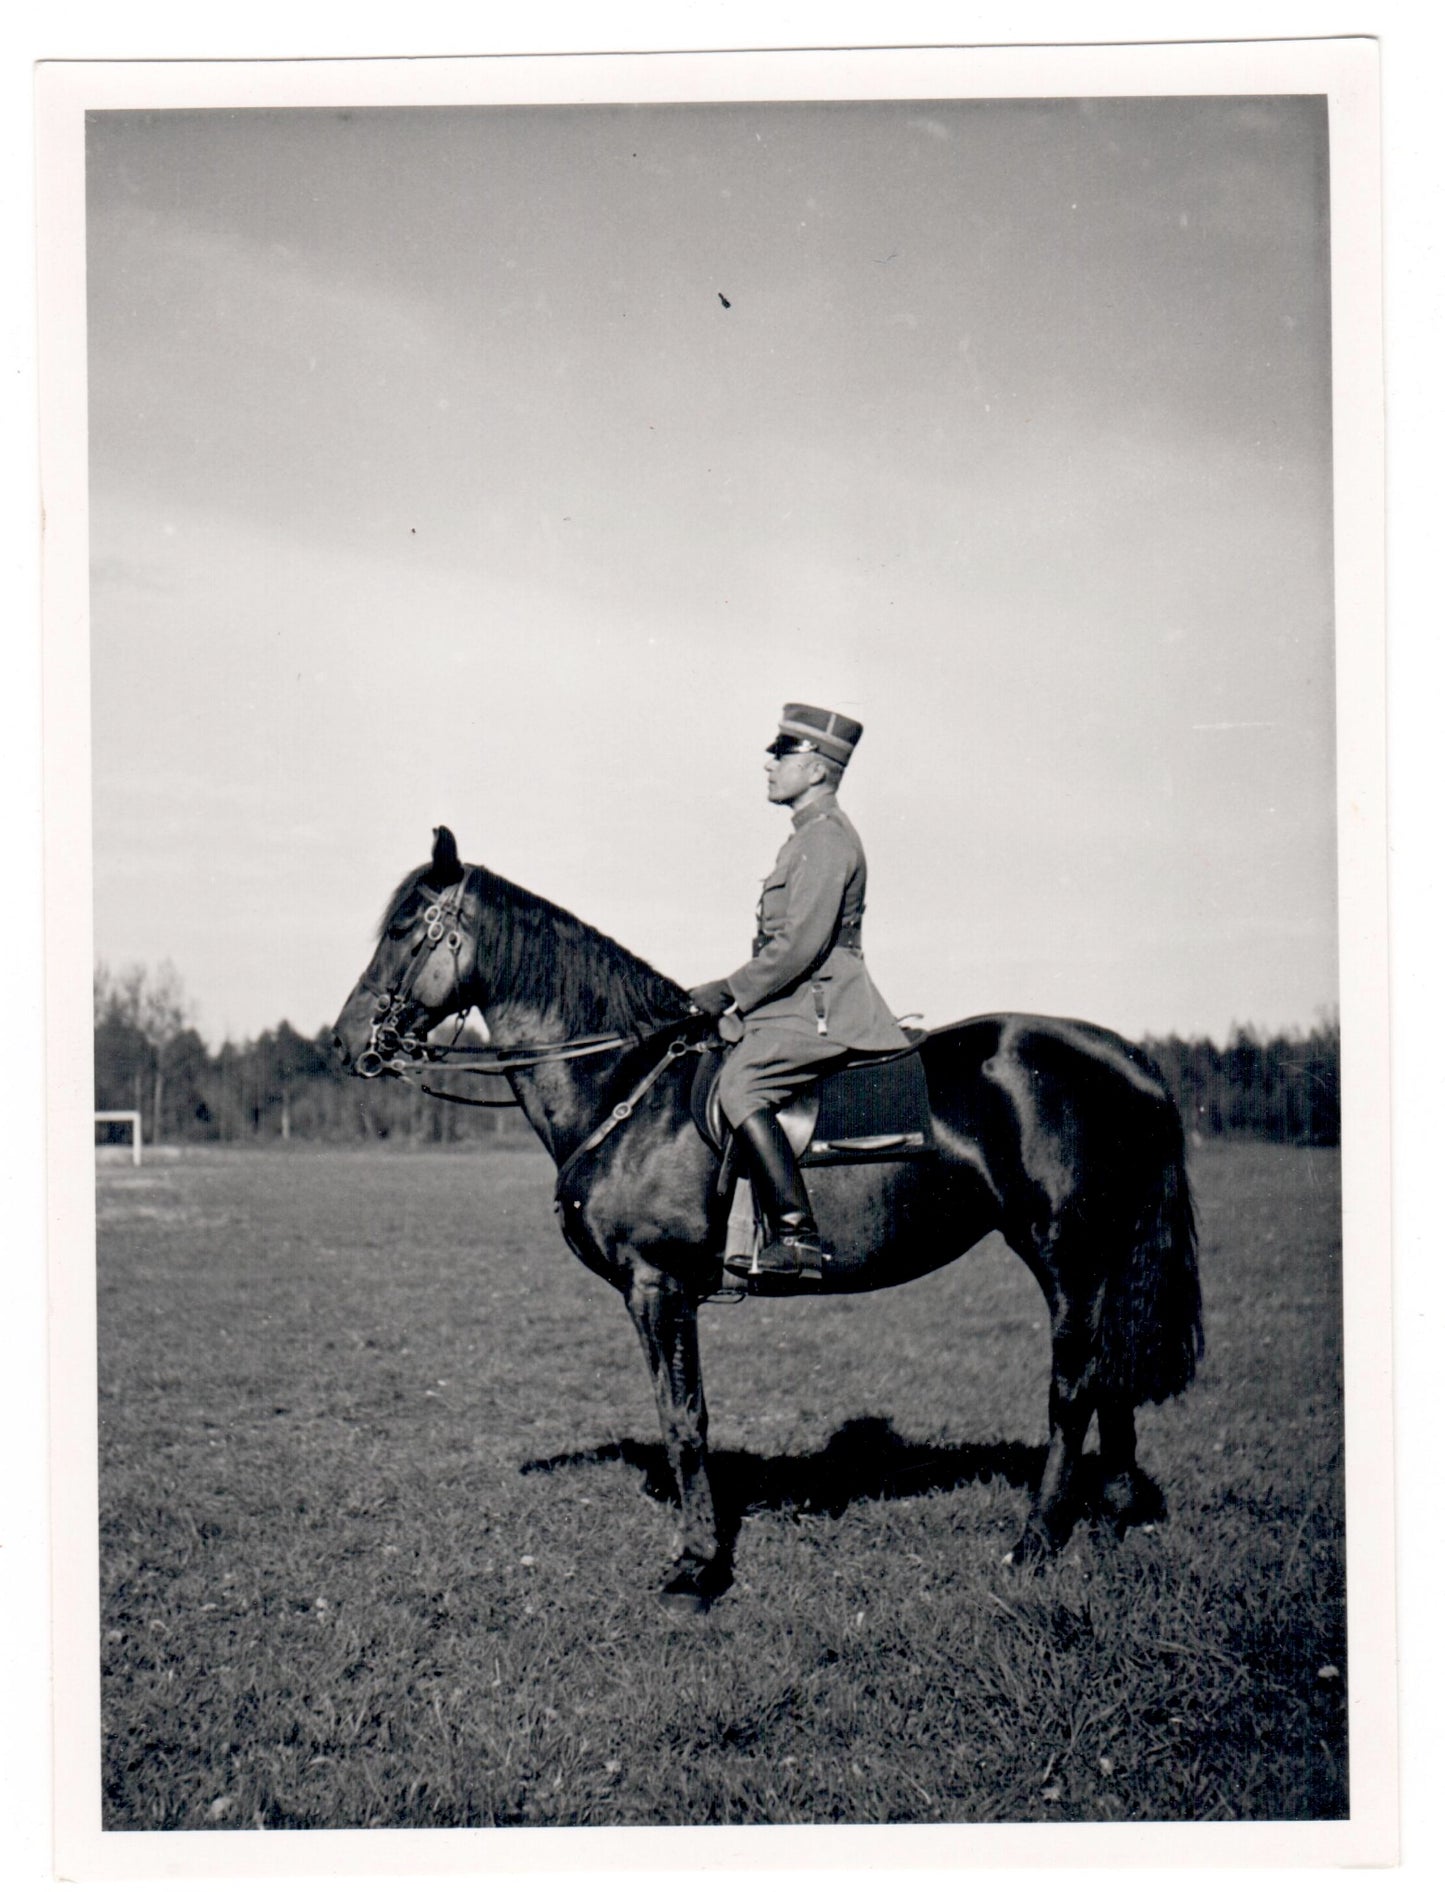 Vintage Military Photography - Swedish Officer - A Soldier on Horse - Sweden